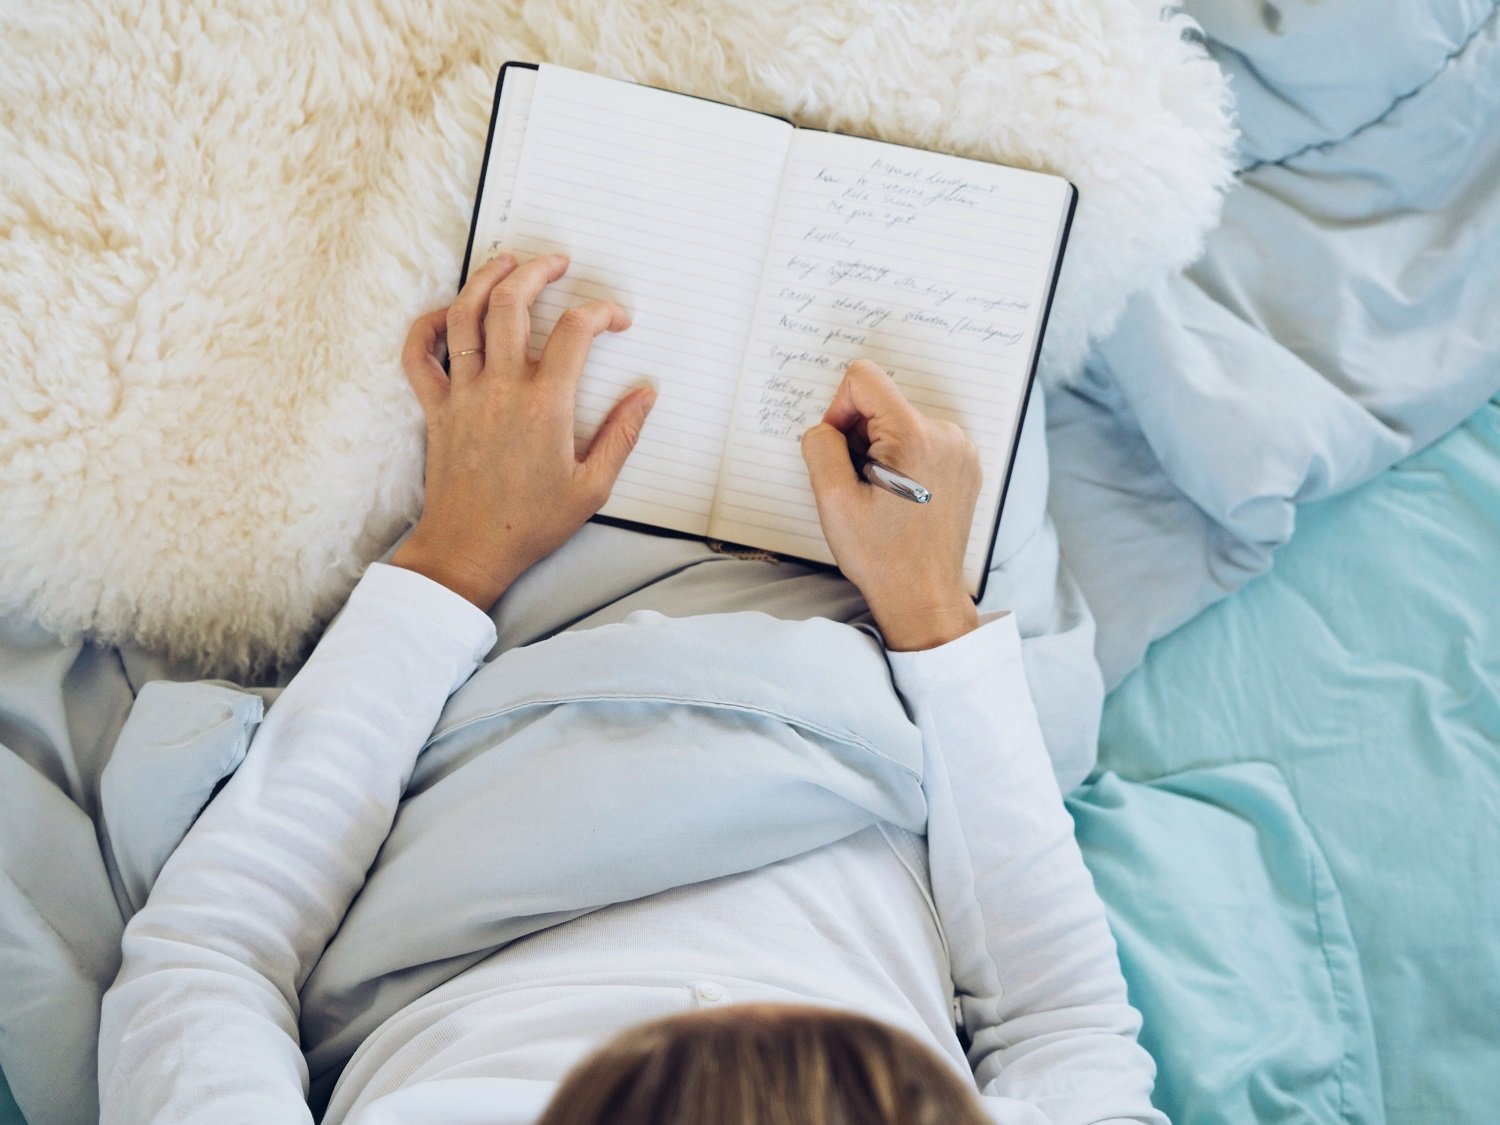 6 Bedtime Routine Activities to Help You Fall Asleep